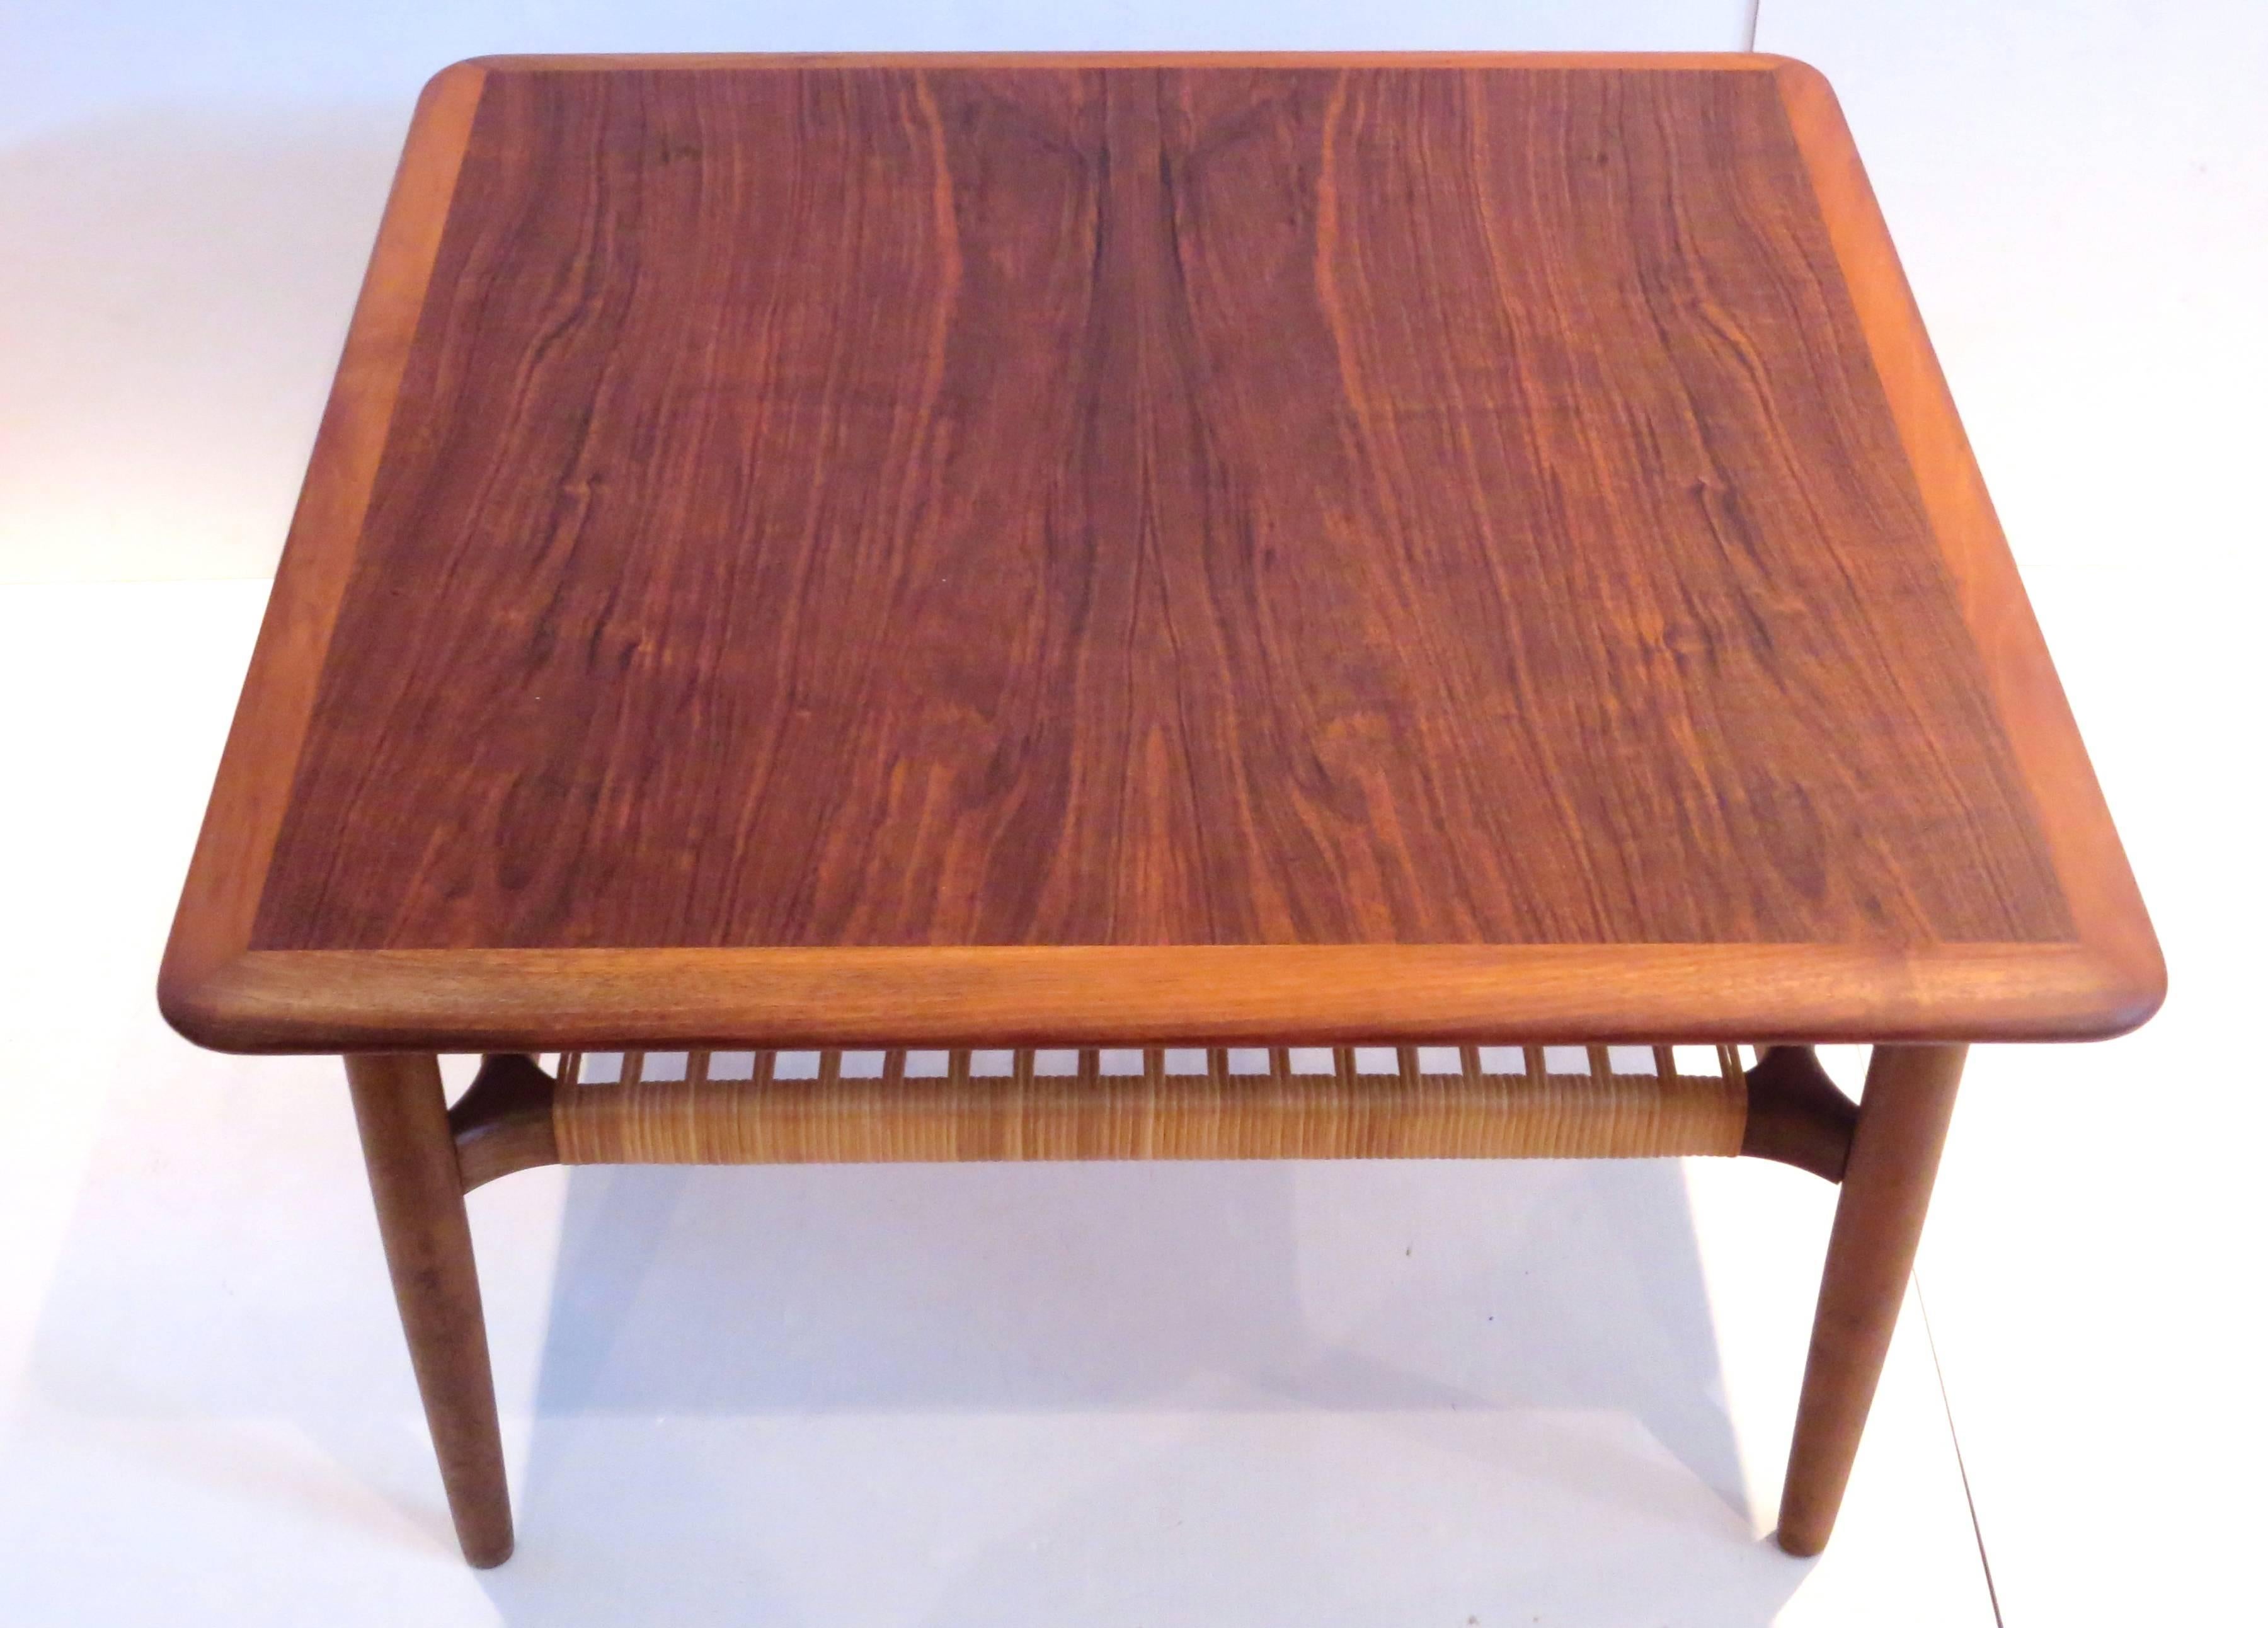 Simple elegant beautiful square coffee table or cocktail end table designed by Gunnar Schwartz, in walnut with caned shelf excellent condition freshly refinished with Danish Control tag, circa 1950s solid and sturdy.